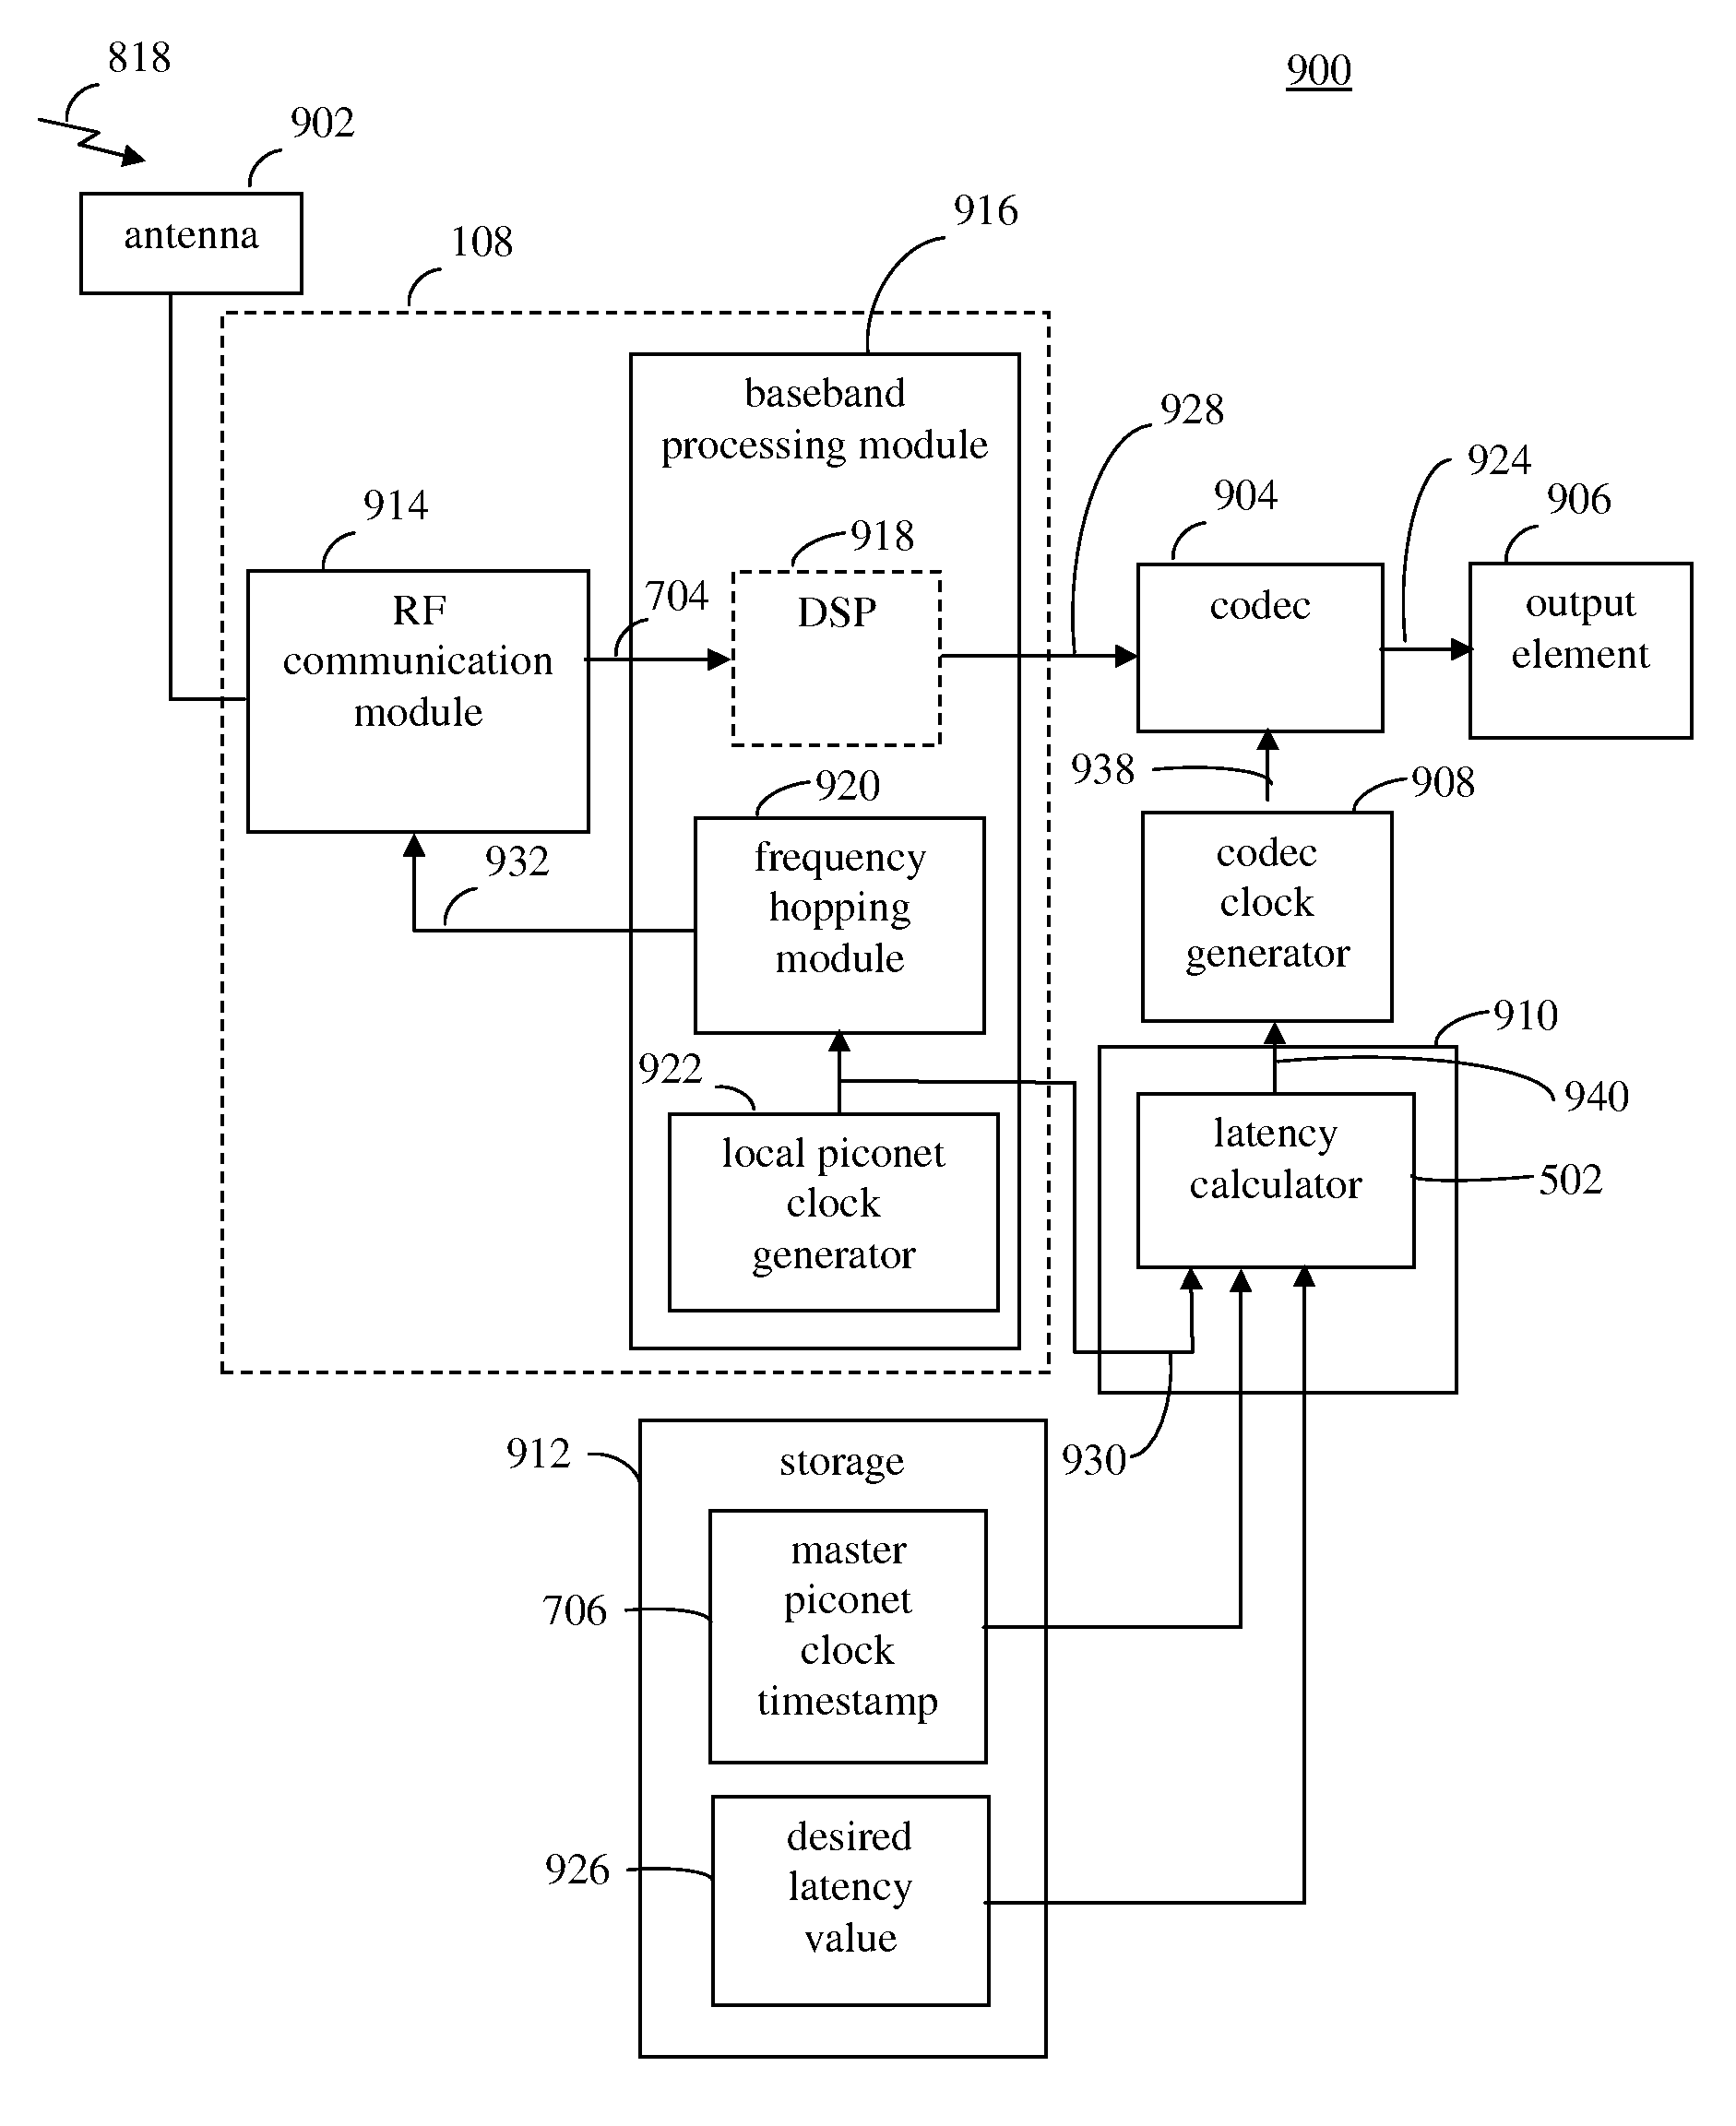 Synchronization of a split audio, video, or other data stream with separate sinks